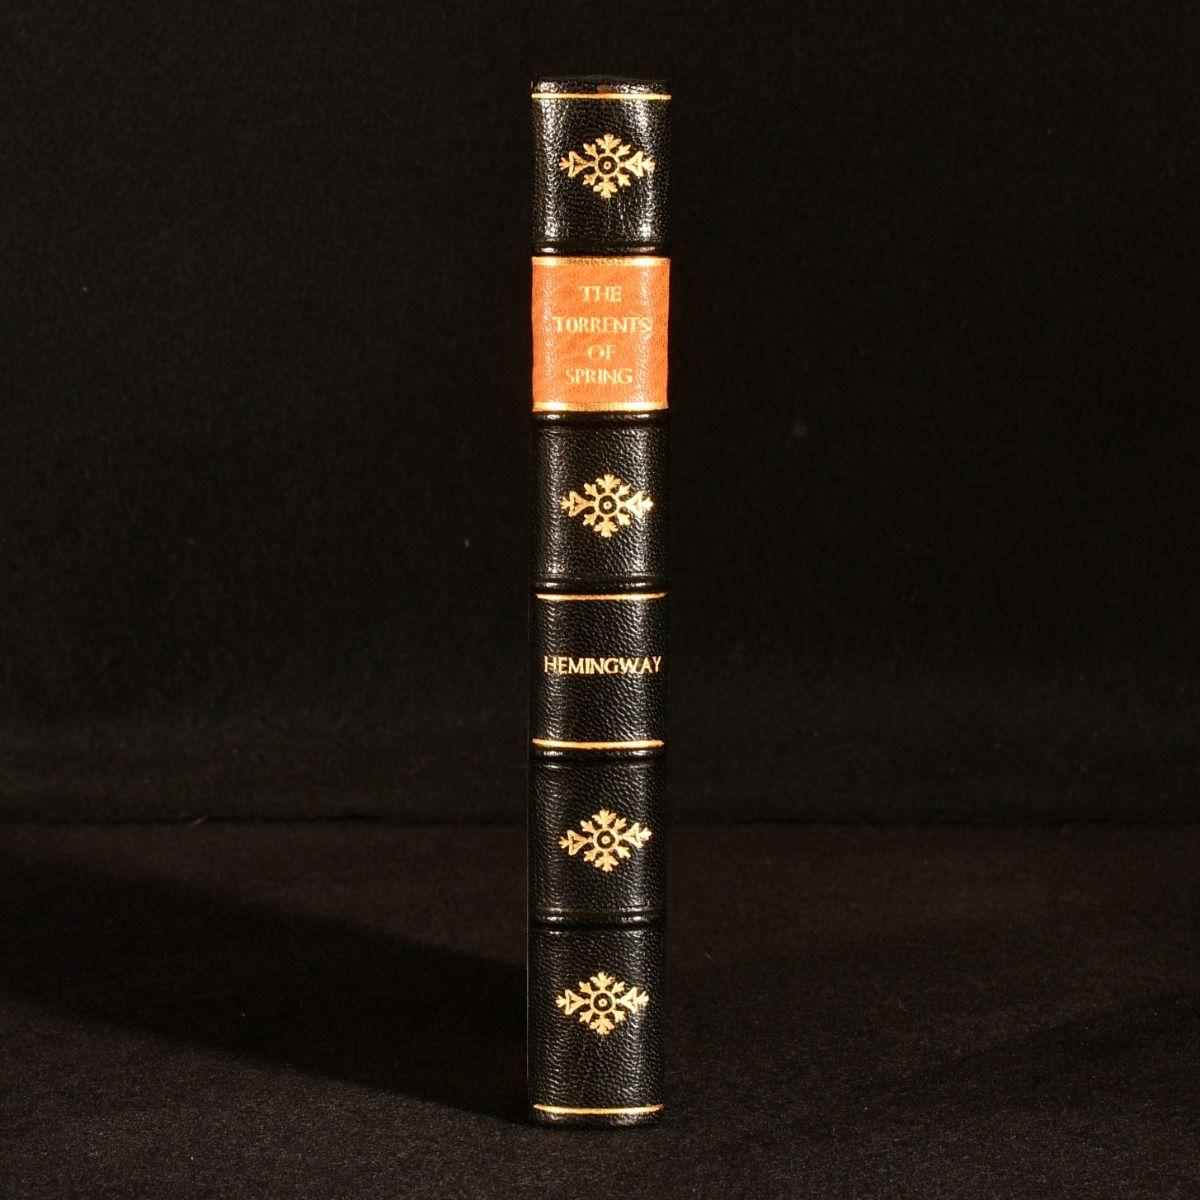 A finely bound copy of this lesser known satirical novel by great American author Ernest Hemingway, the second edition.

The second edition of this work, which was first published in 1926.

Smartly rebound in a half morocco binding with marbled